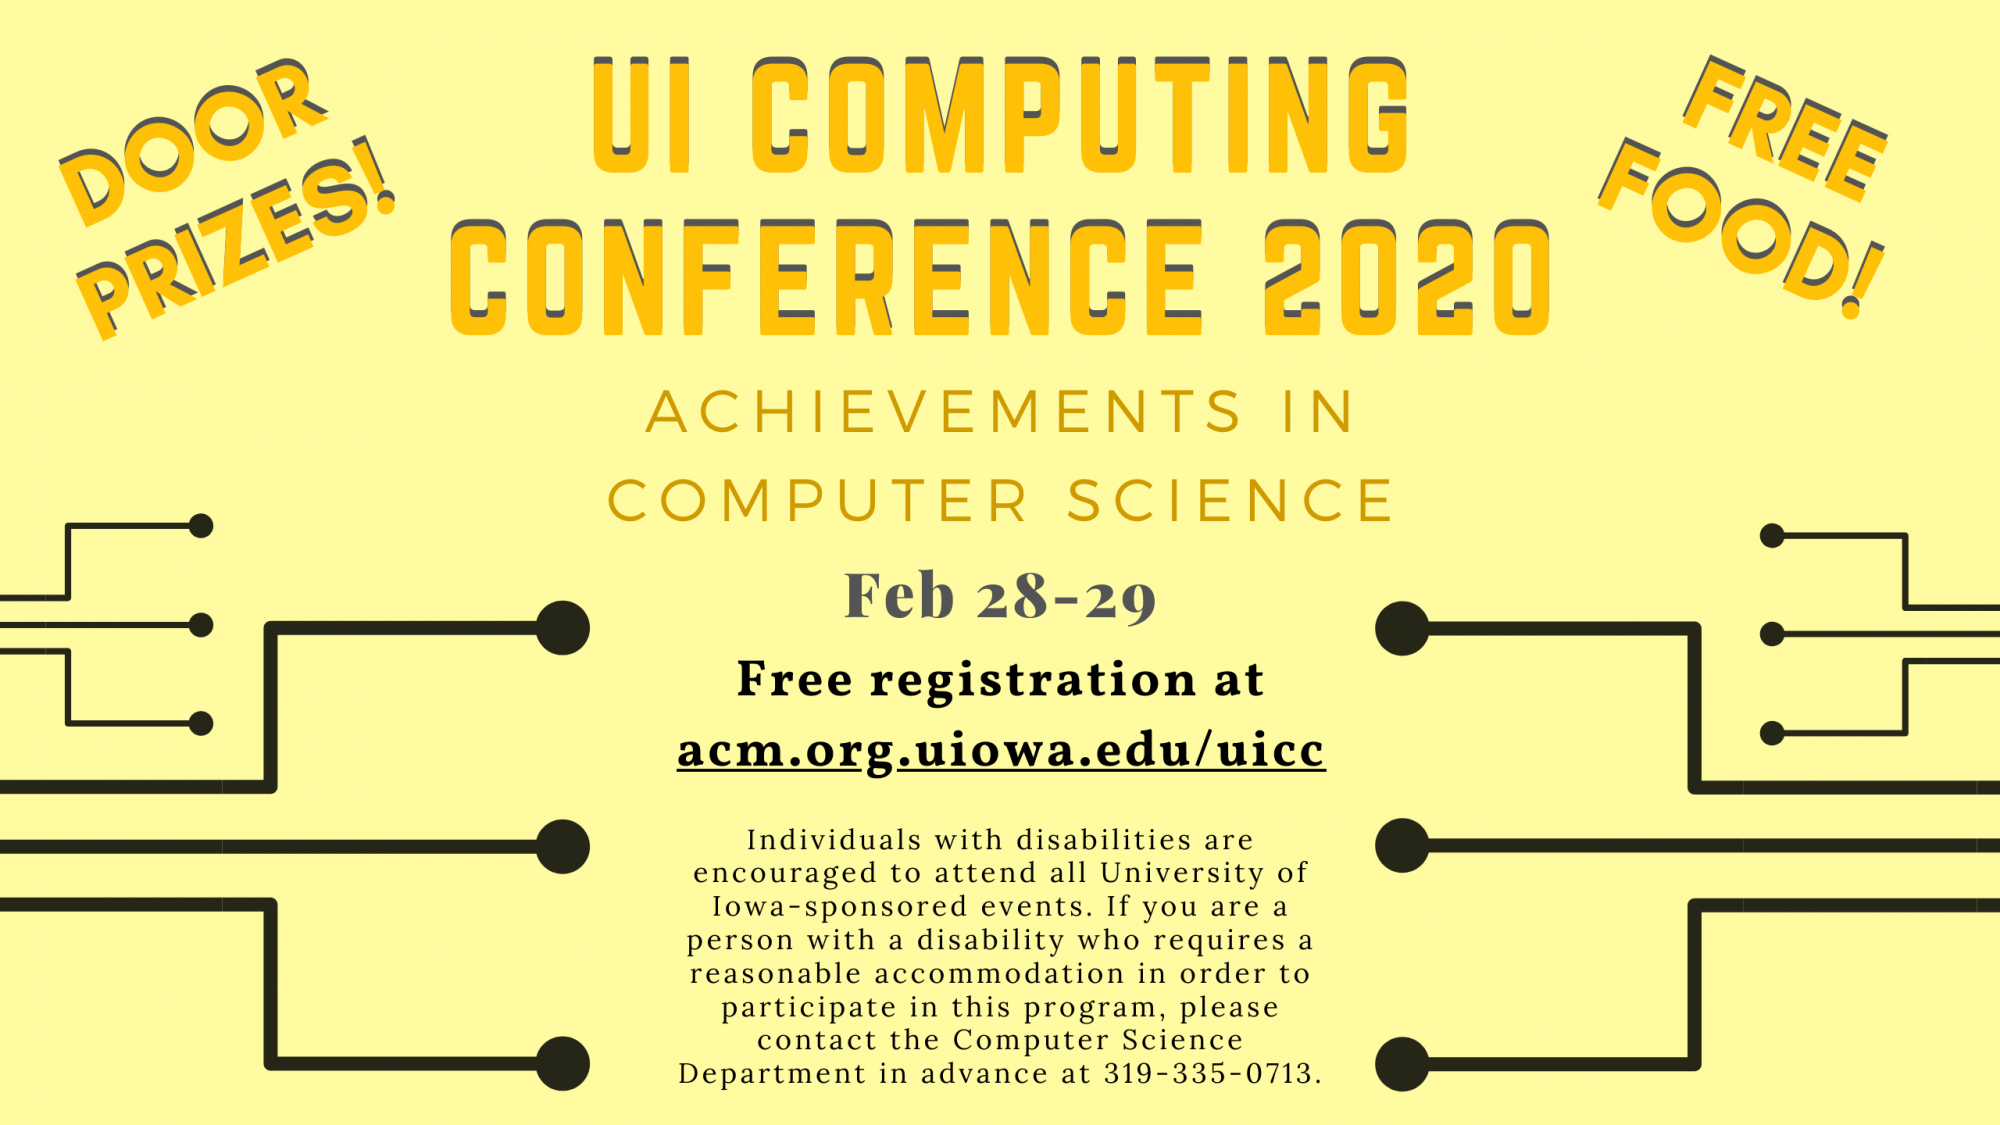 REGISTRATION FOR UICC 2020 (Feb 28-29) IS NOW OPEN @ acm.org.uiowa.edu/uicc/registrationRegistration by February 17th guarantees you a free t-shirt and swag bag, as well as food at all of the meals served at the conference. It has been reported that this form does not work with Safari. If you encounter issues, please use a different browser.  All are welcome to register for the University of Iowa Computing Conference!